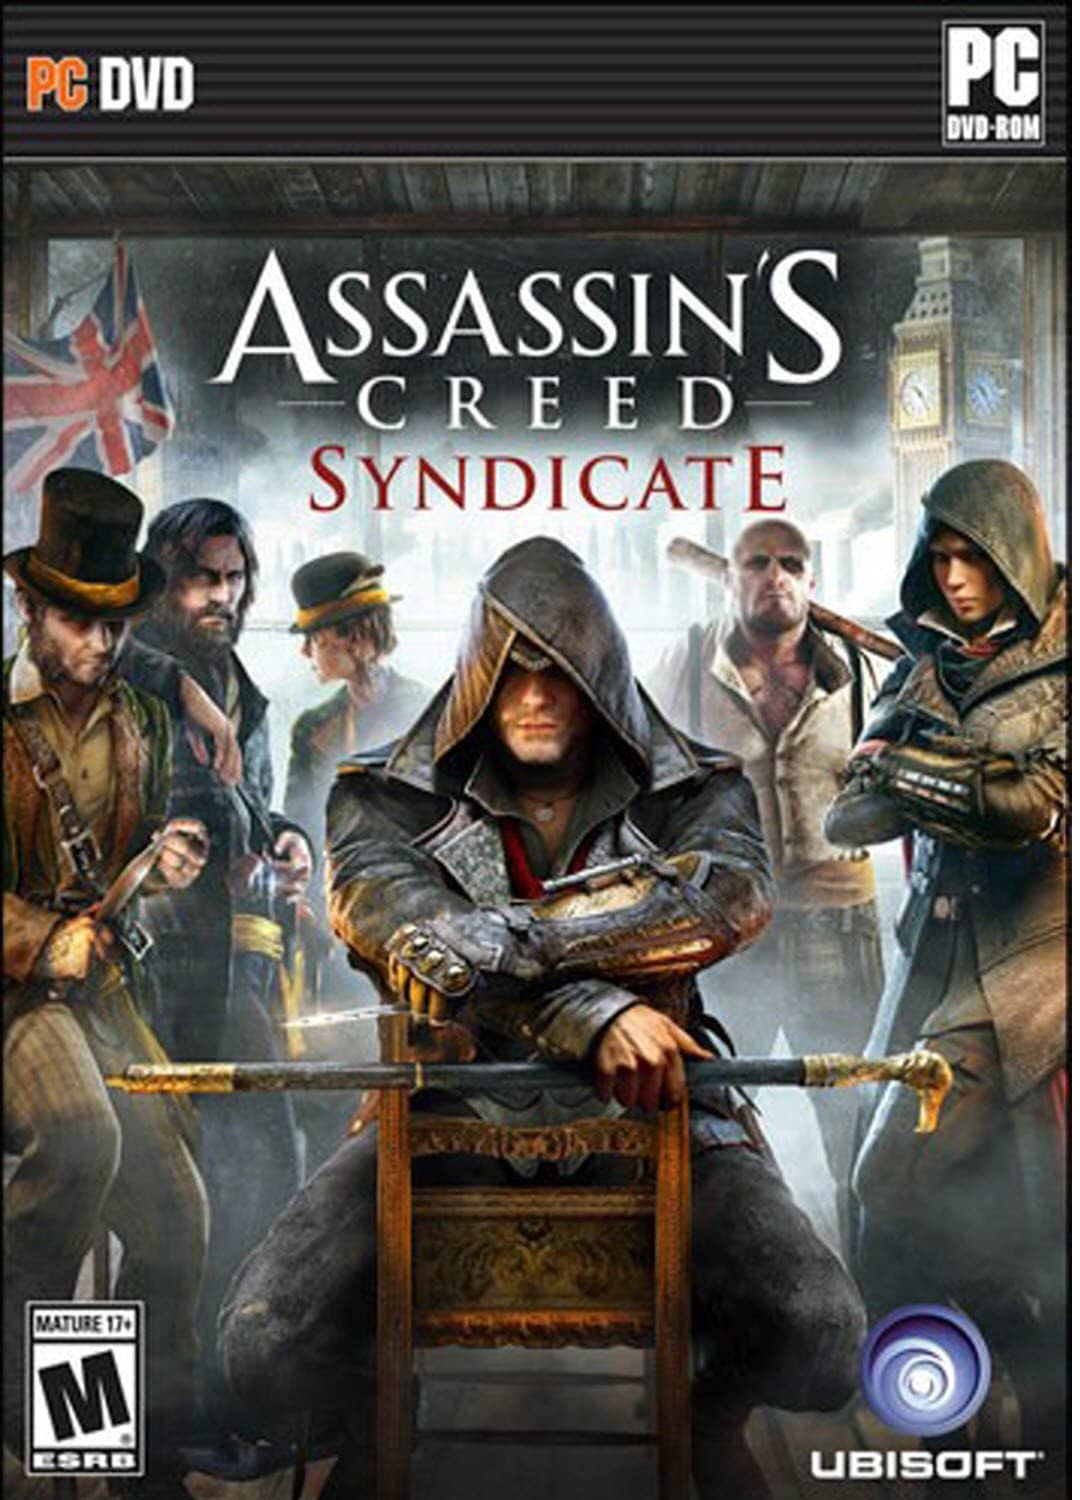 Assassin's Creed Syndicate - Windows